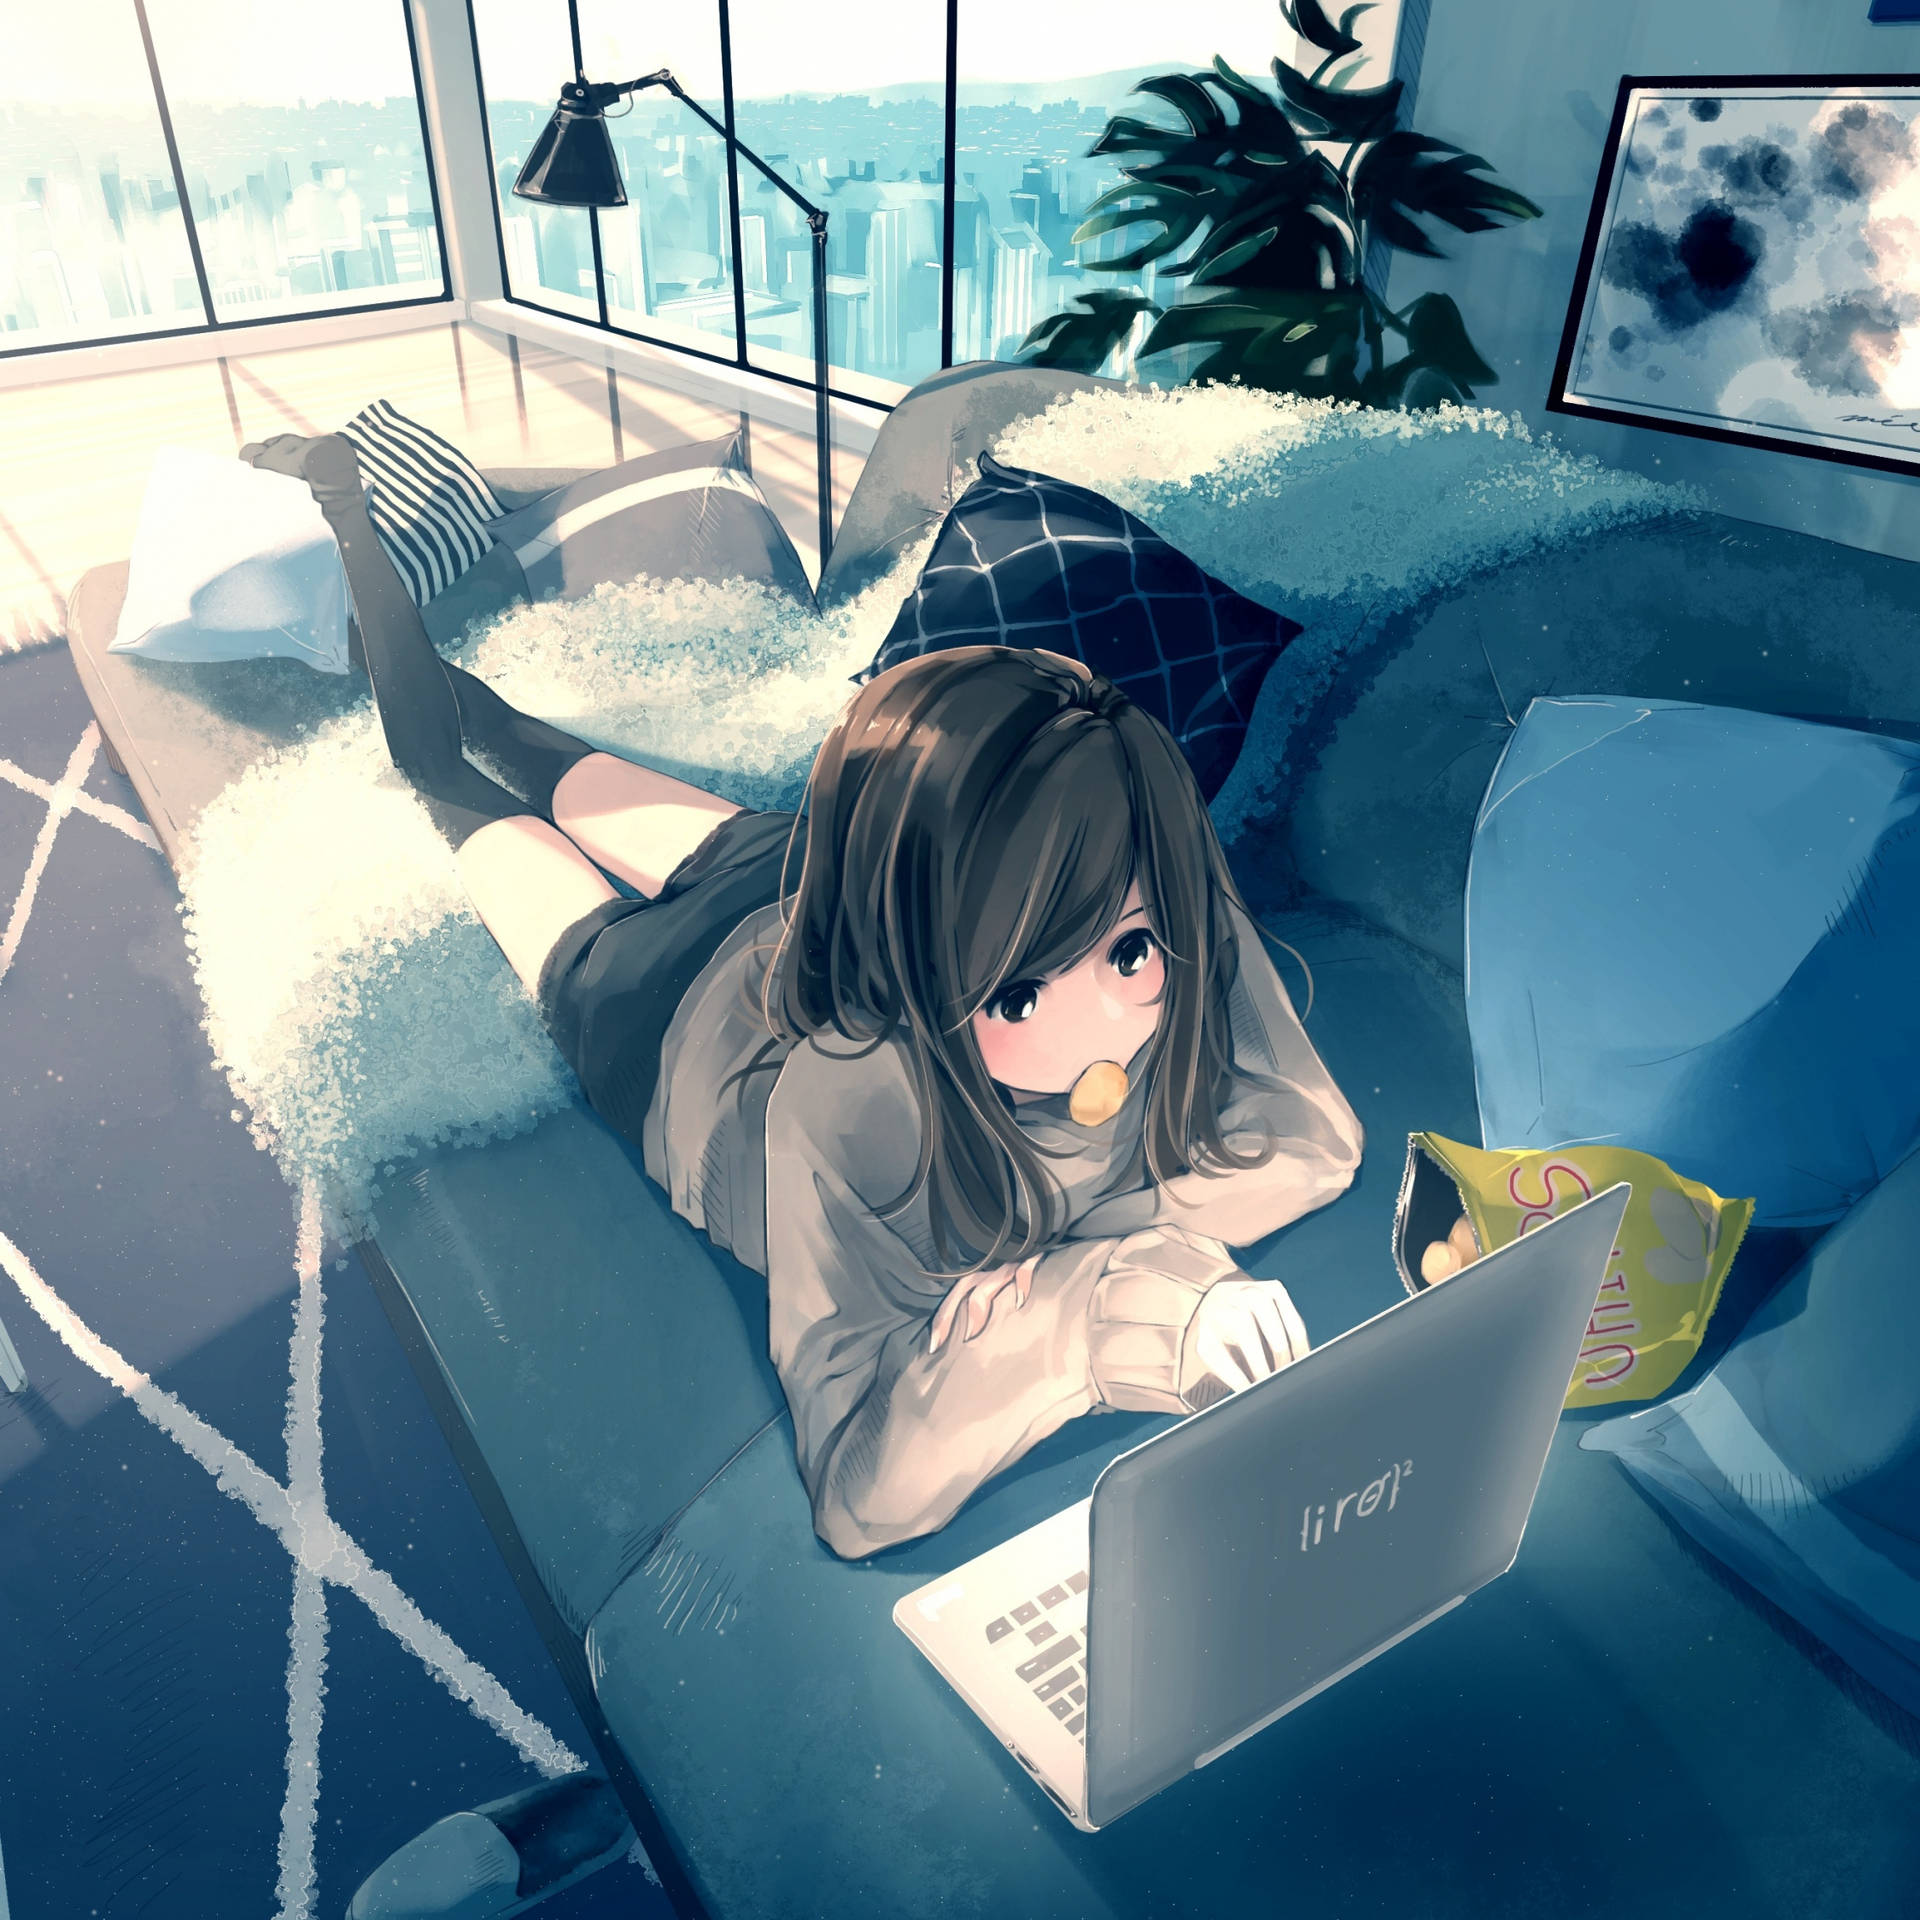 Anime Girl Lies Down Working On Her Laptop Background